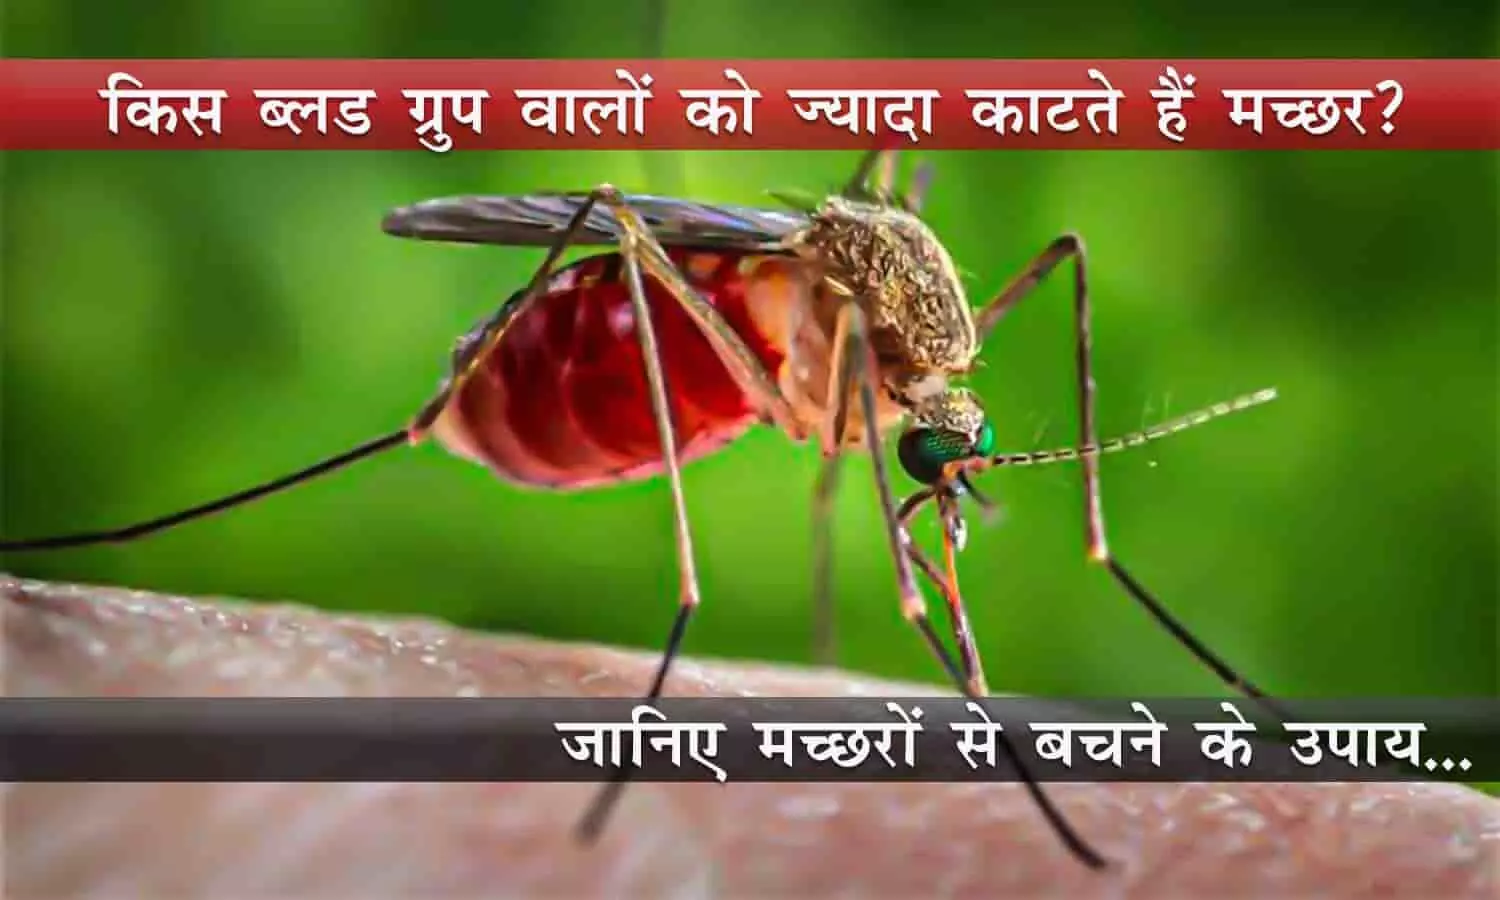 Know ways to avoid mosquitoes...